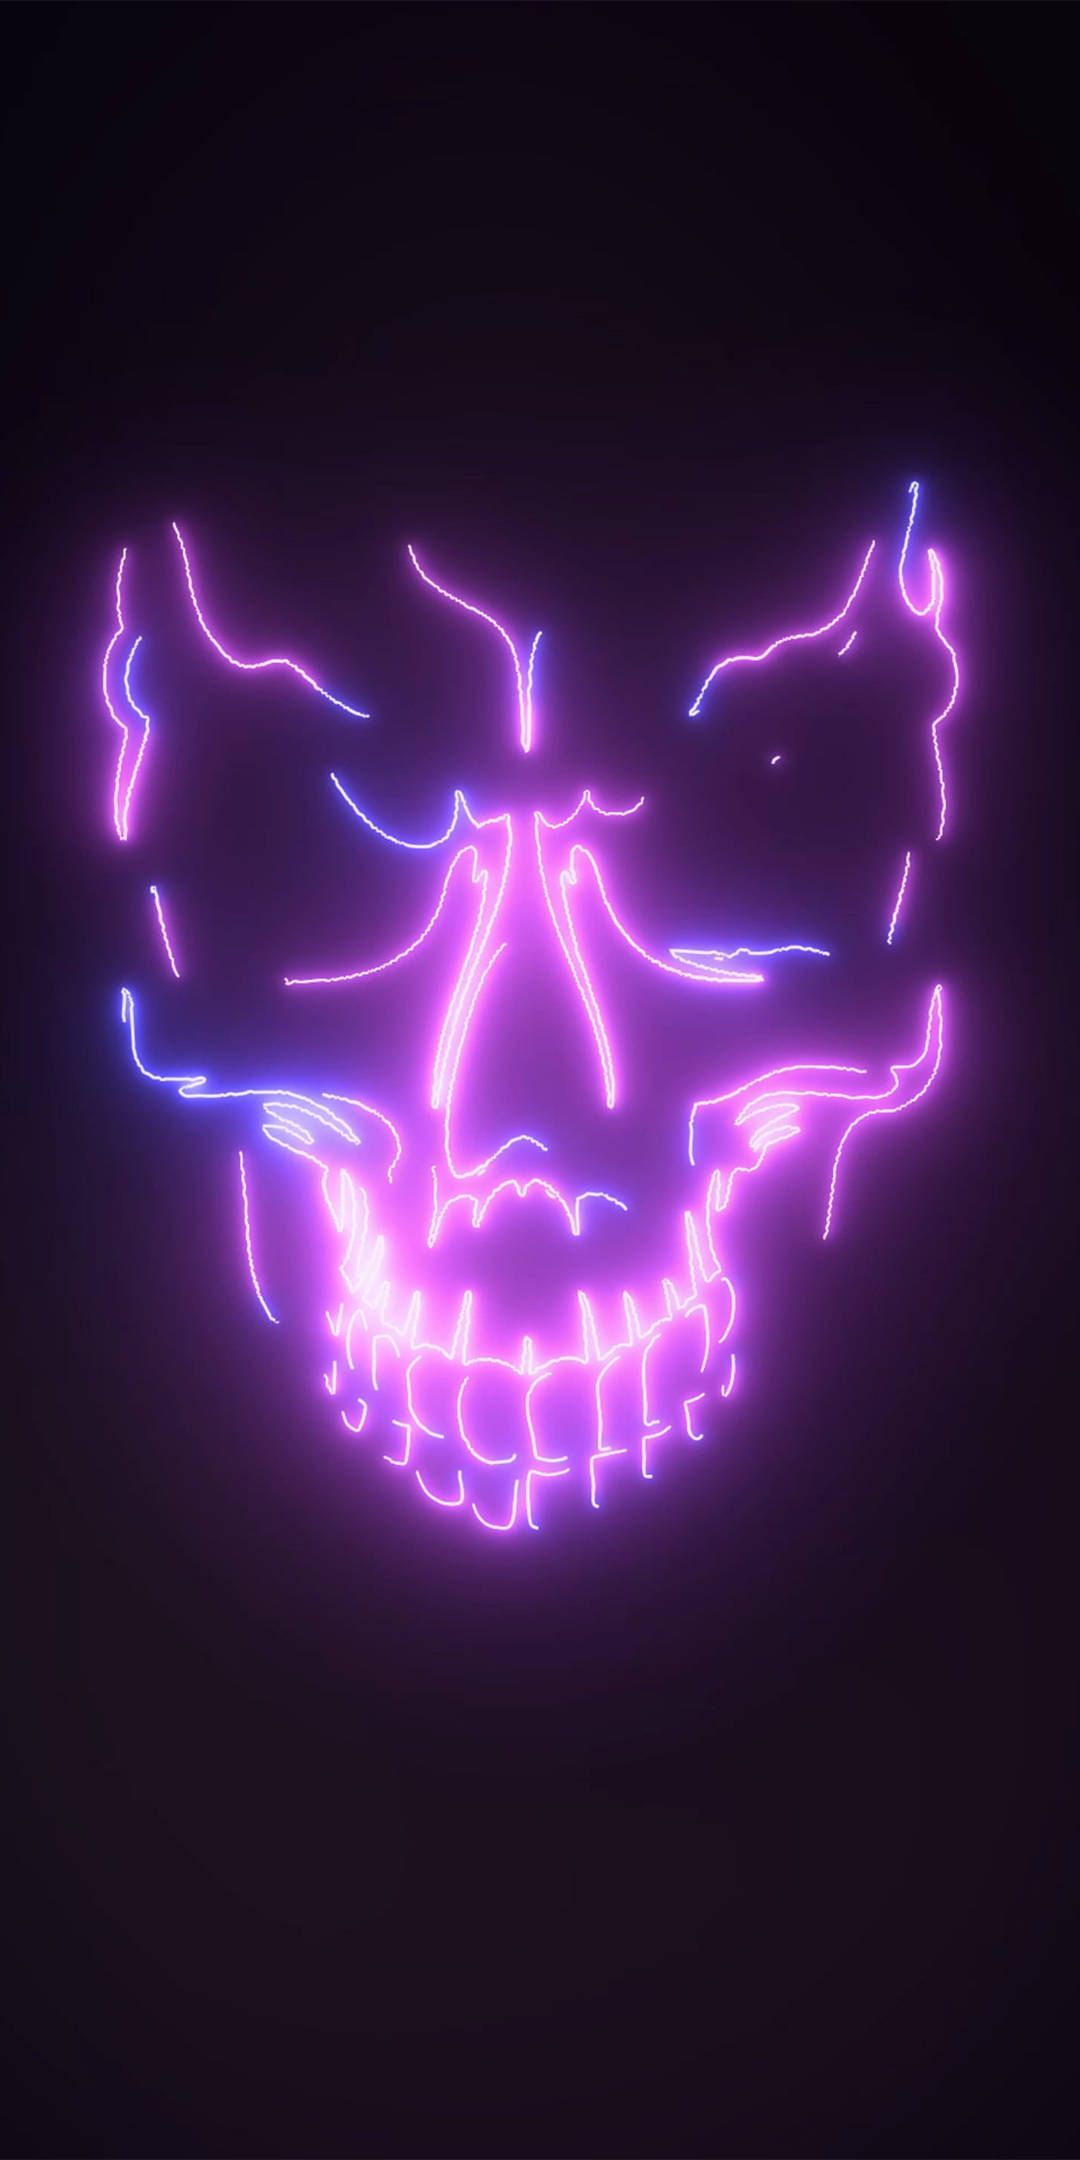 A neon purple and pink mask on a black background - Dark purple